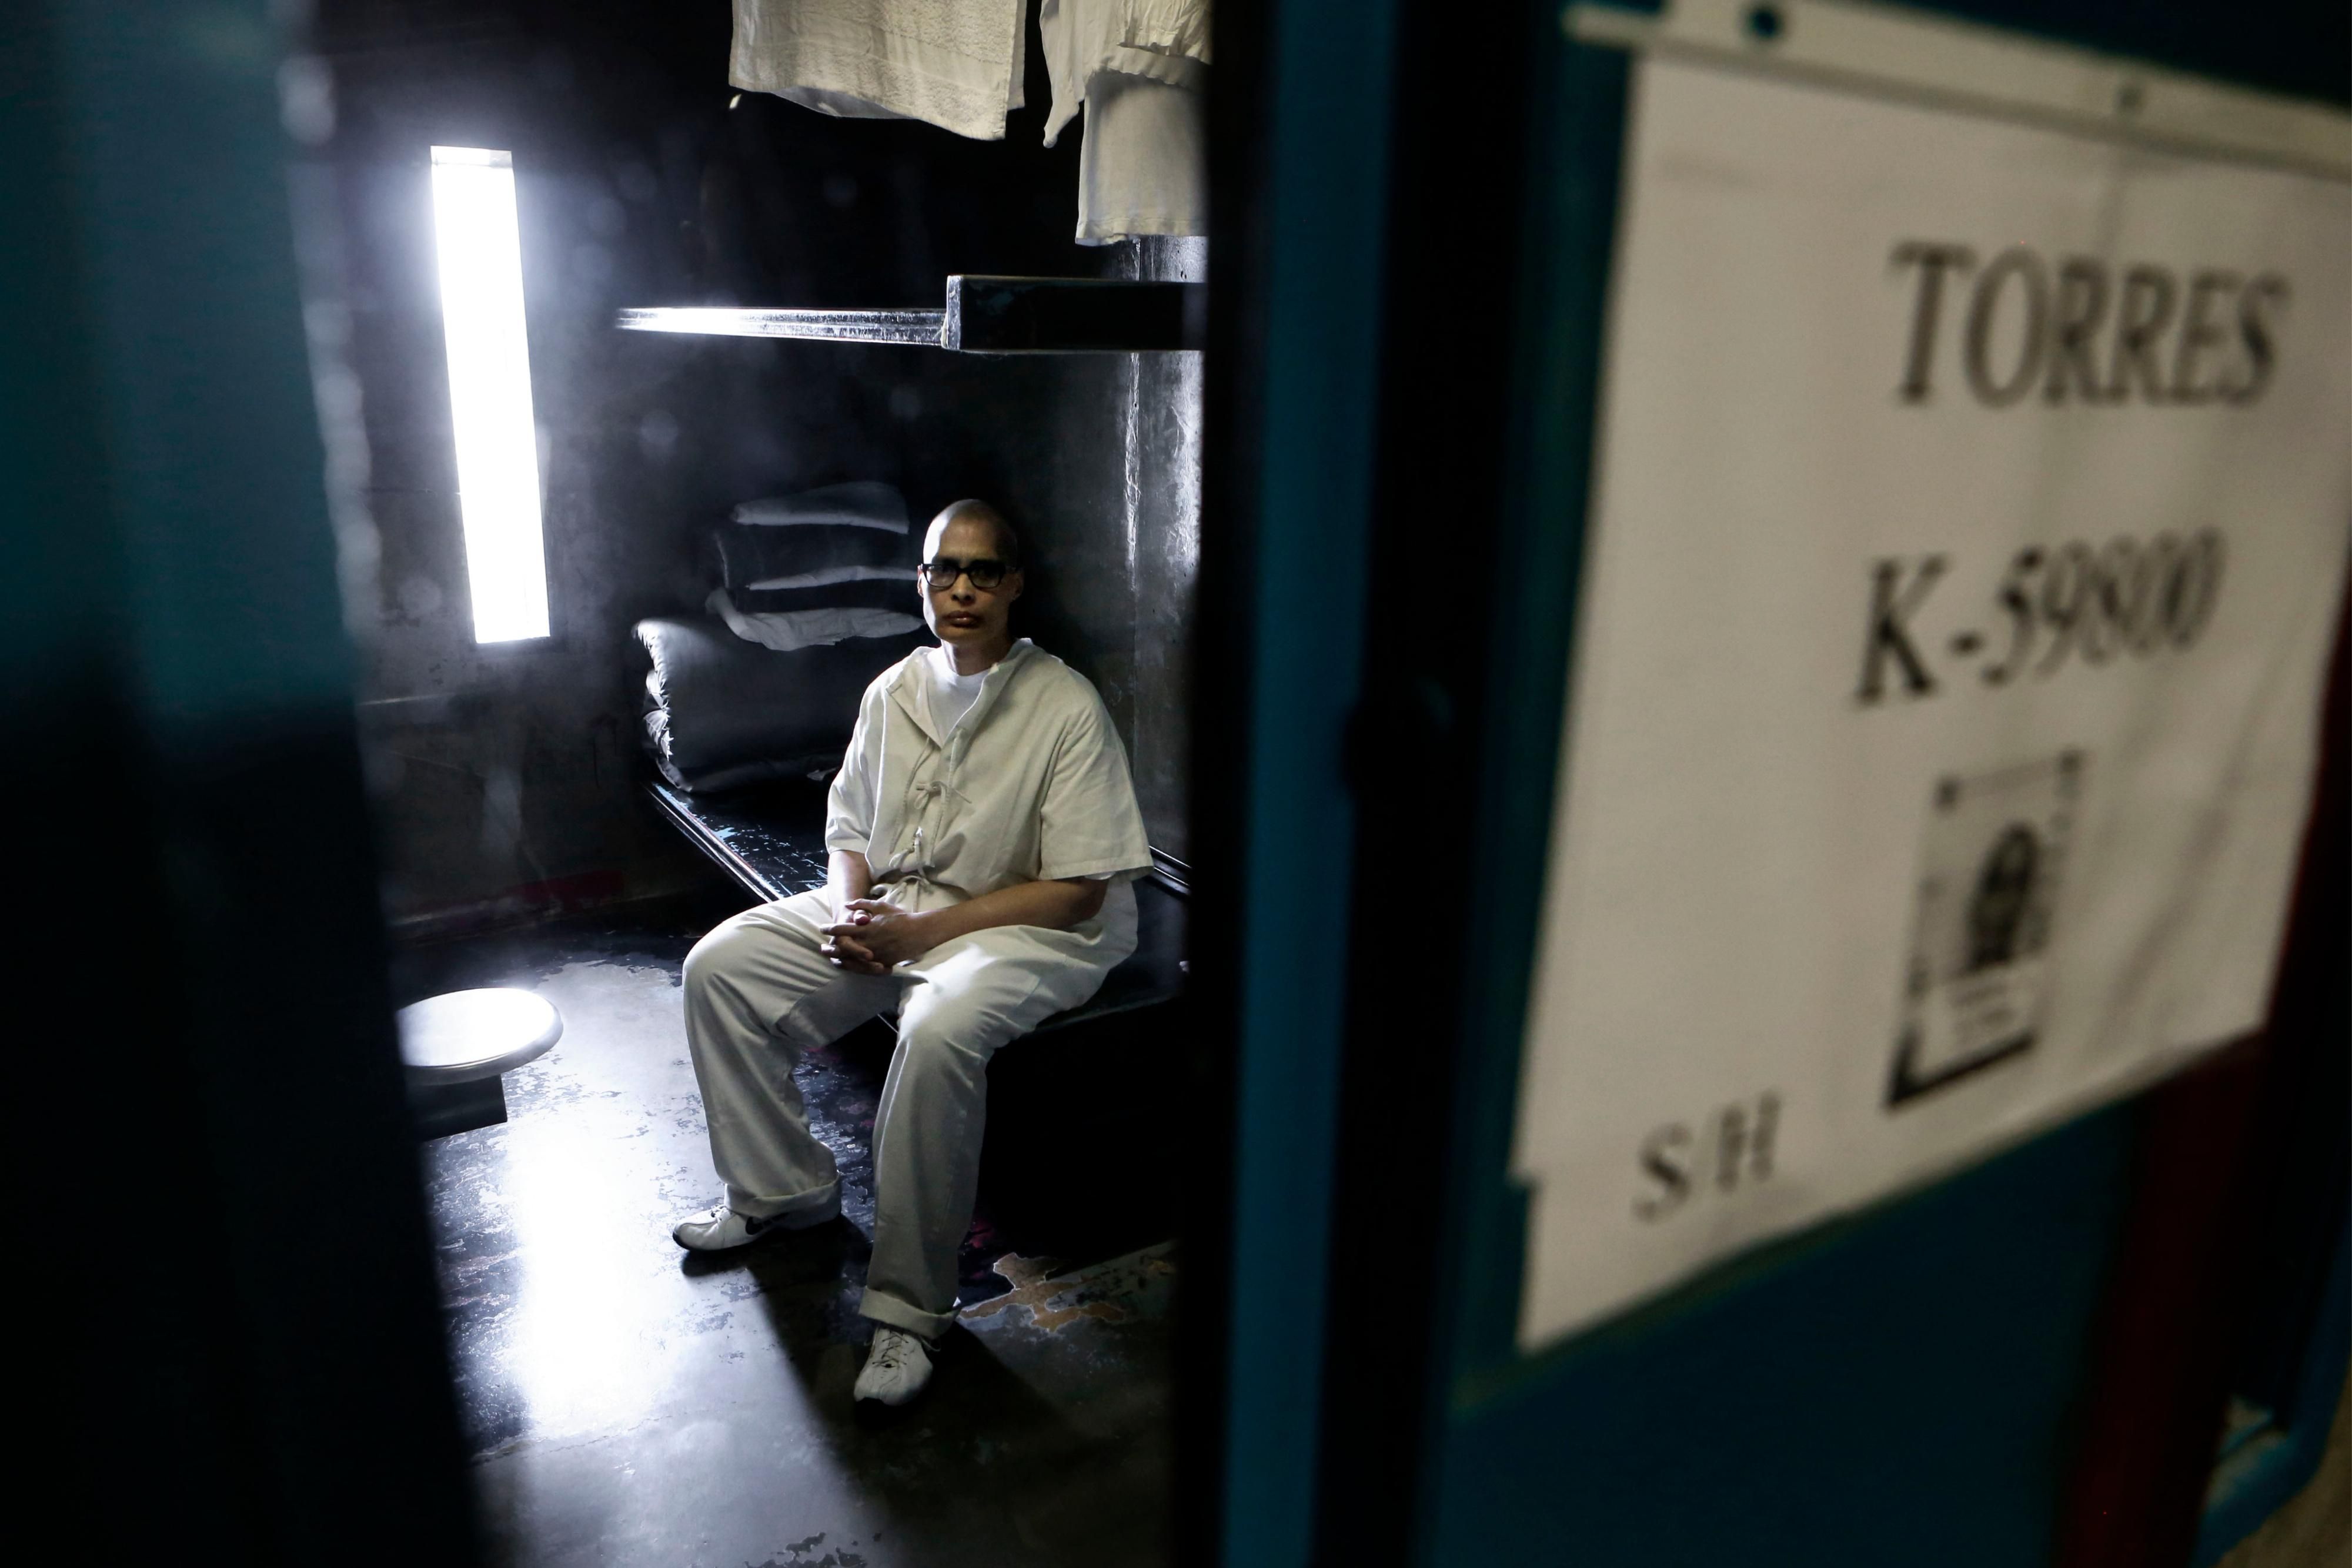 48-year-old Anthony Torres, who is serving a life sentence for murder, sits inside his cell at security housing unit B at the California State Prison Sacramento on March 5, 2014 in Represa, California. (Photo: Michael Macor/The San Francisco Chronicle via Getty Images)